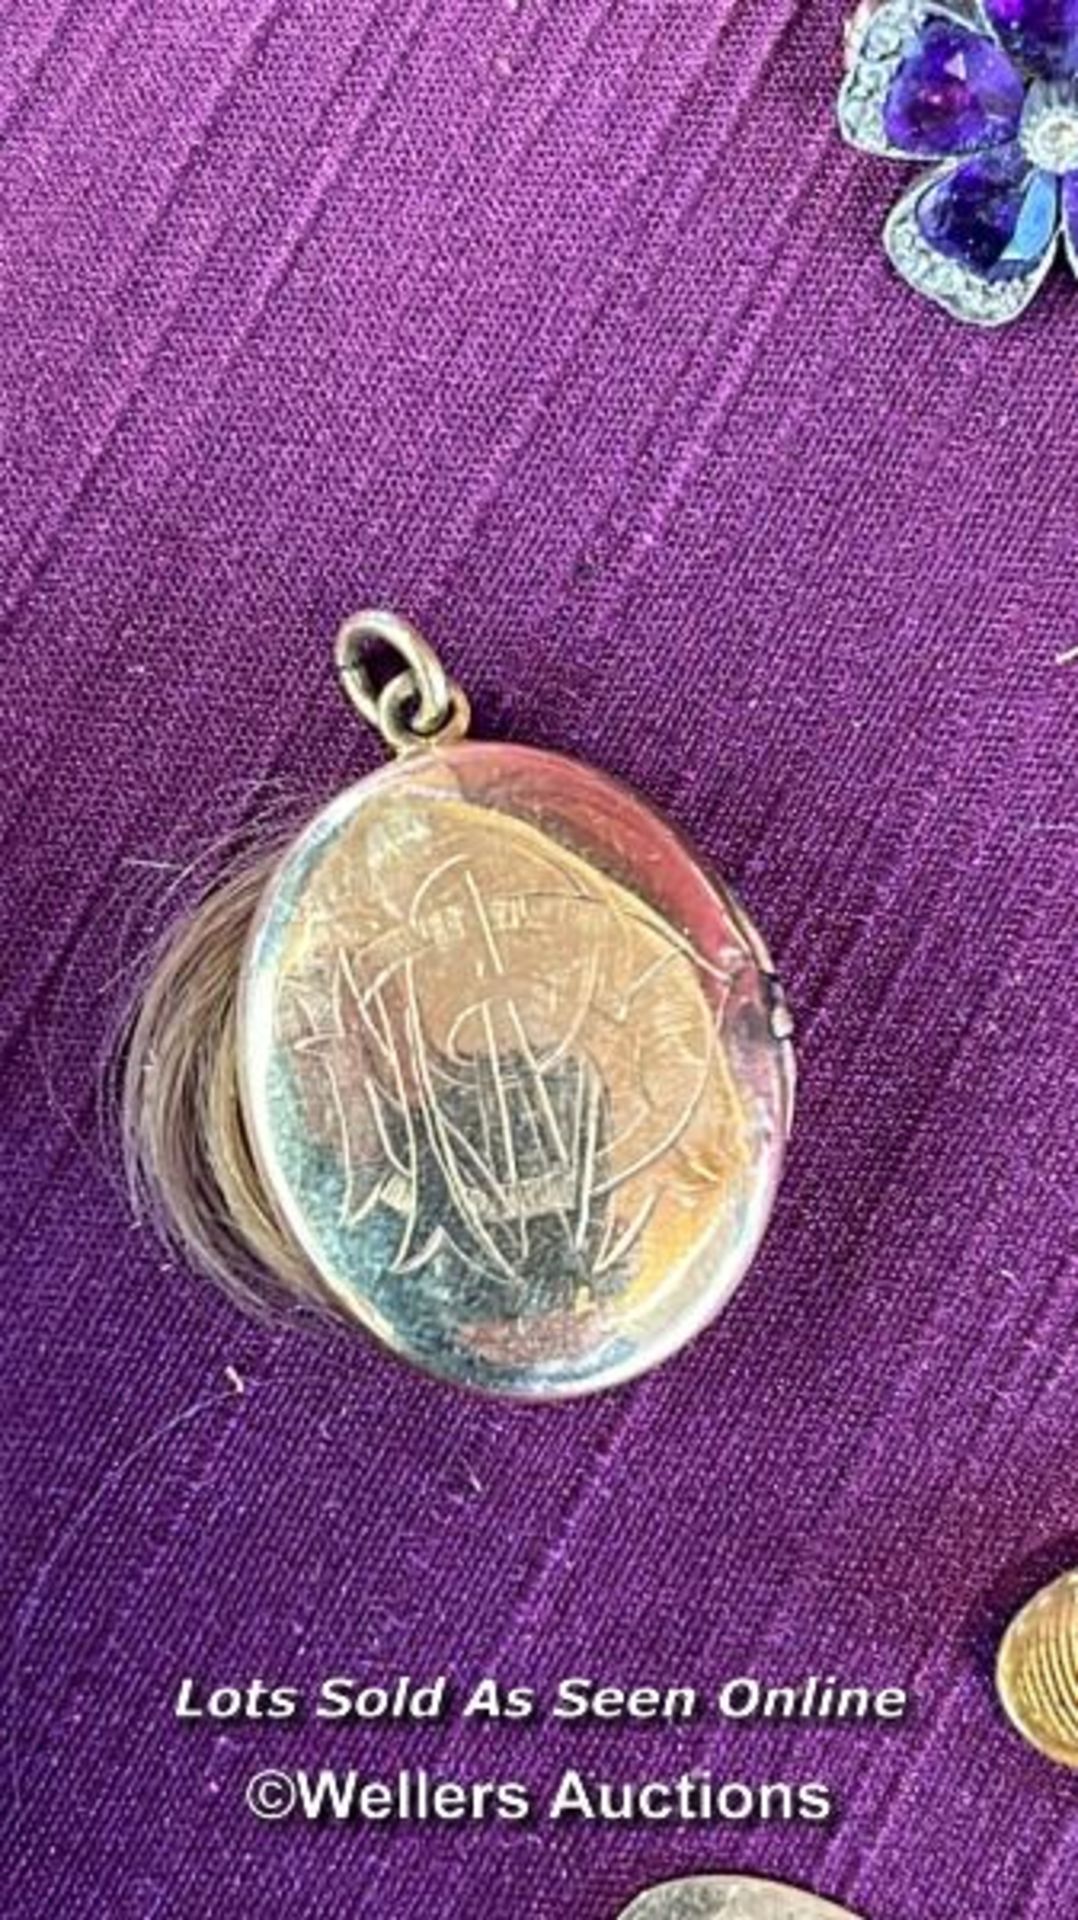 AN UNUSUAL GOLD LOCKET CONTAINING A LOCK OF HAIR, DECORATED WITH ETCHED SKULL AND CROSSBONES, - Image 3 of 6